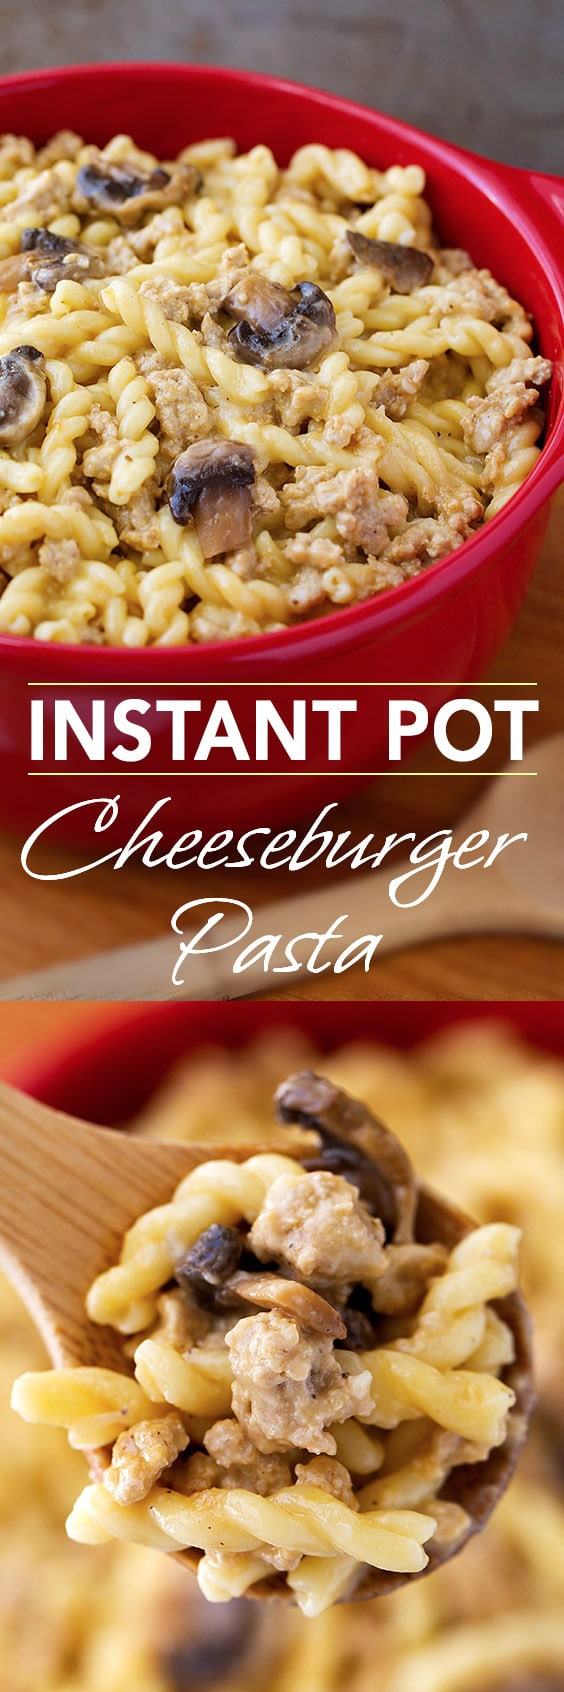 Instant Pot Cheeseburger Pasta is made with ground turkey or ground beef, and is ready in under an hour! Yummy! simplyhappyfoodie.com